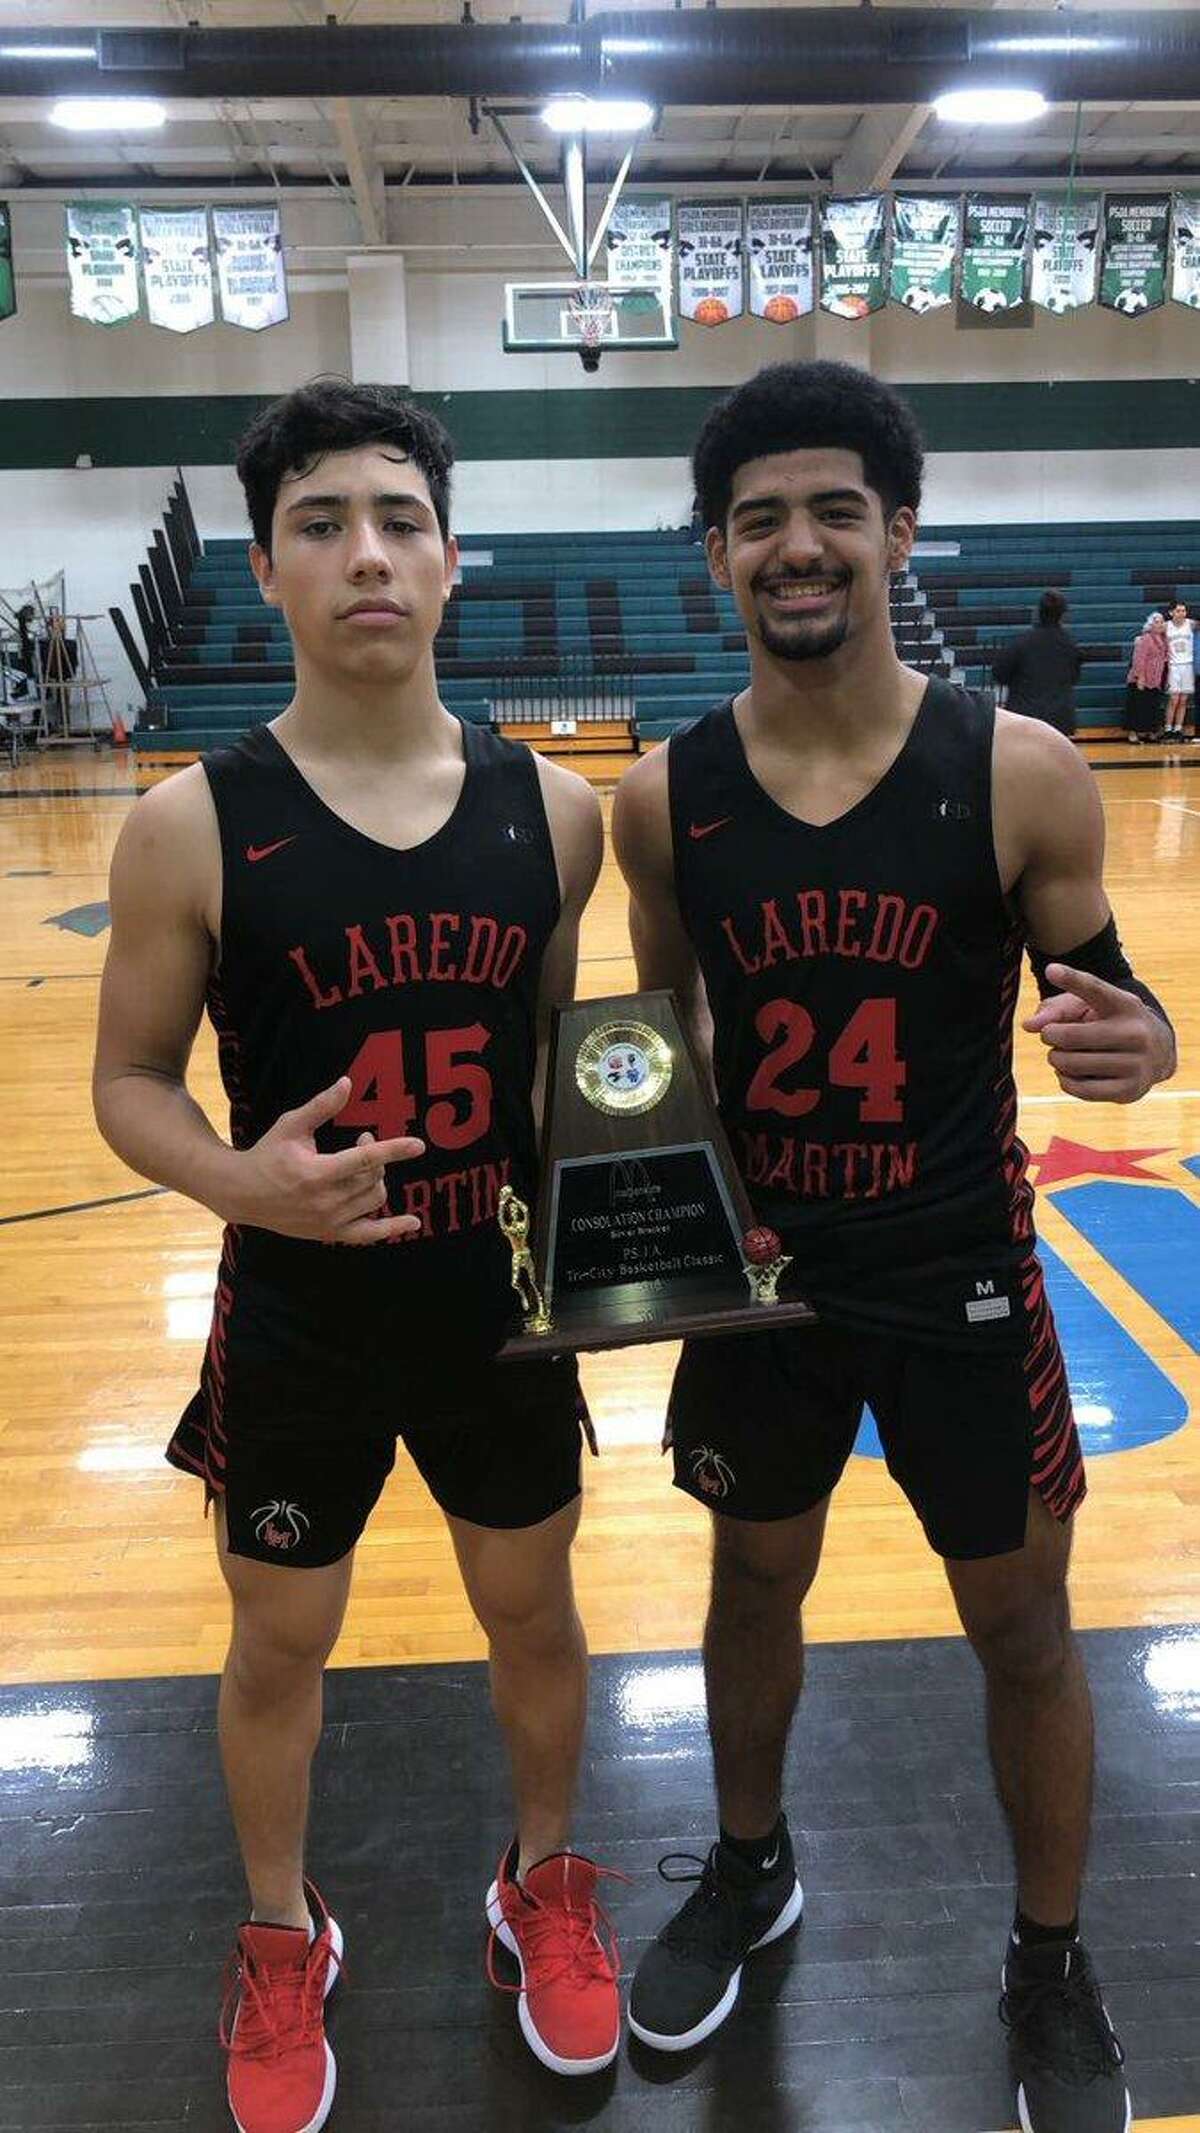 Nelson Vasquez, left, and Mathew Duron combined for 62 points in a pair of wins Saturday at the PSJA North tournament.